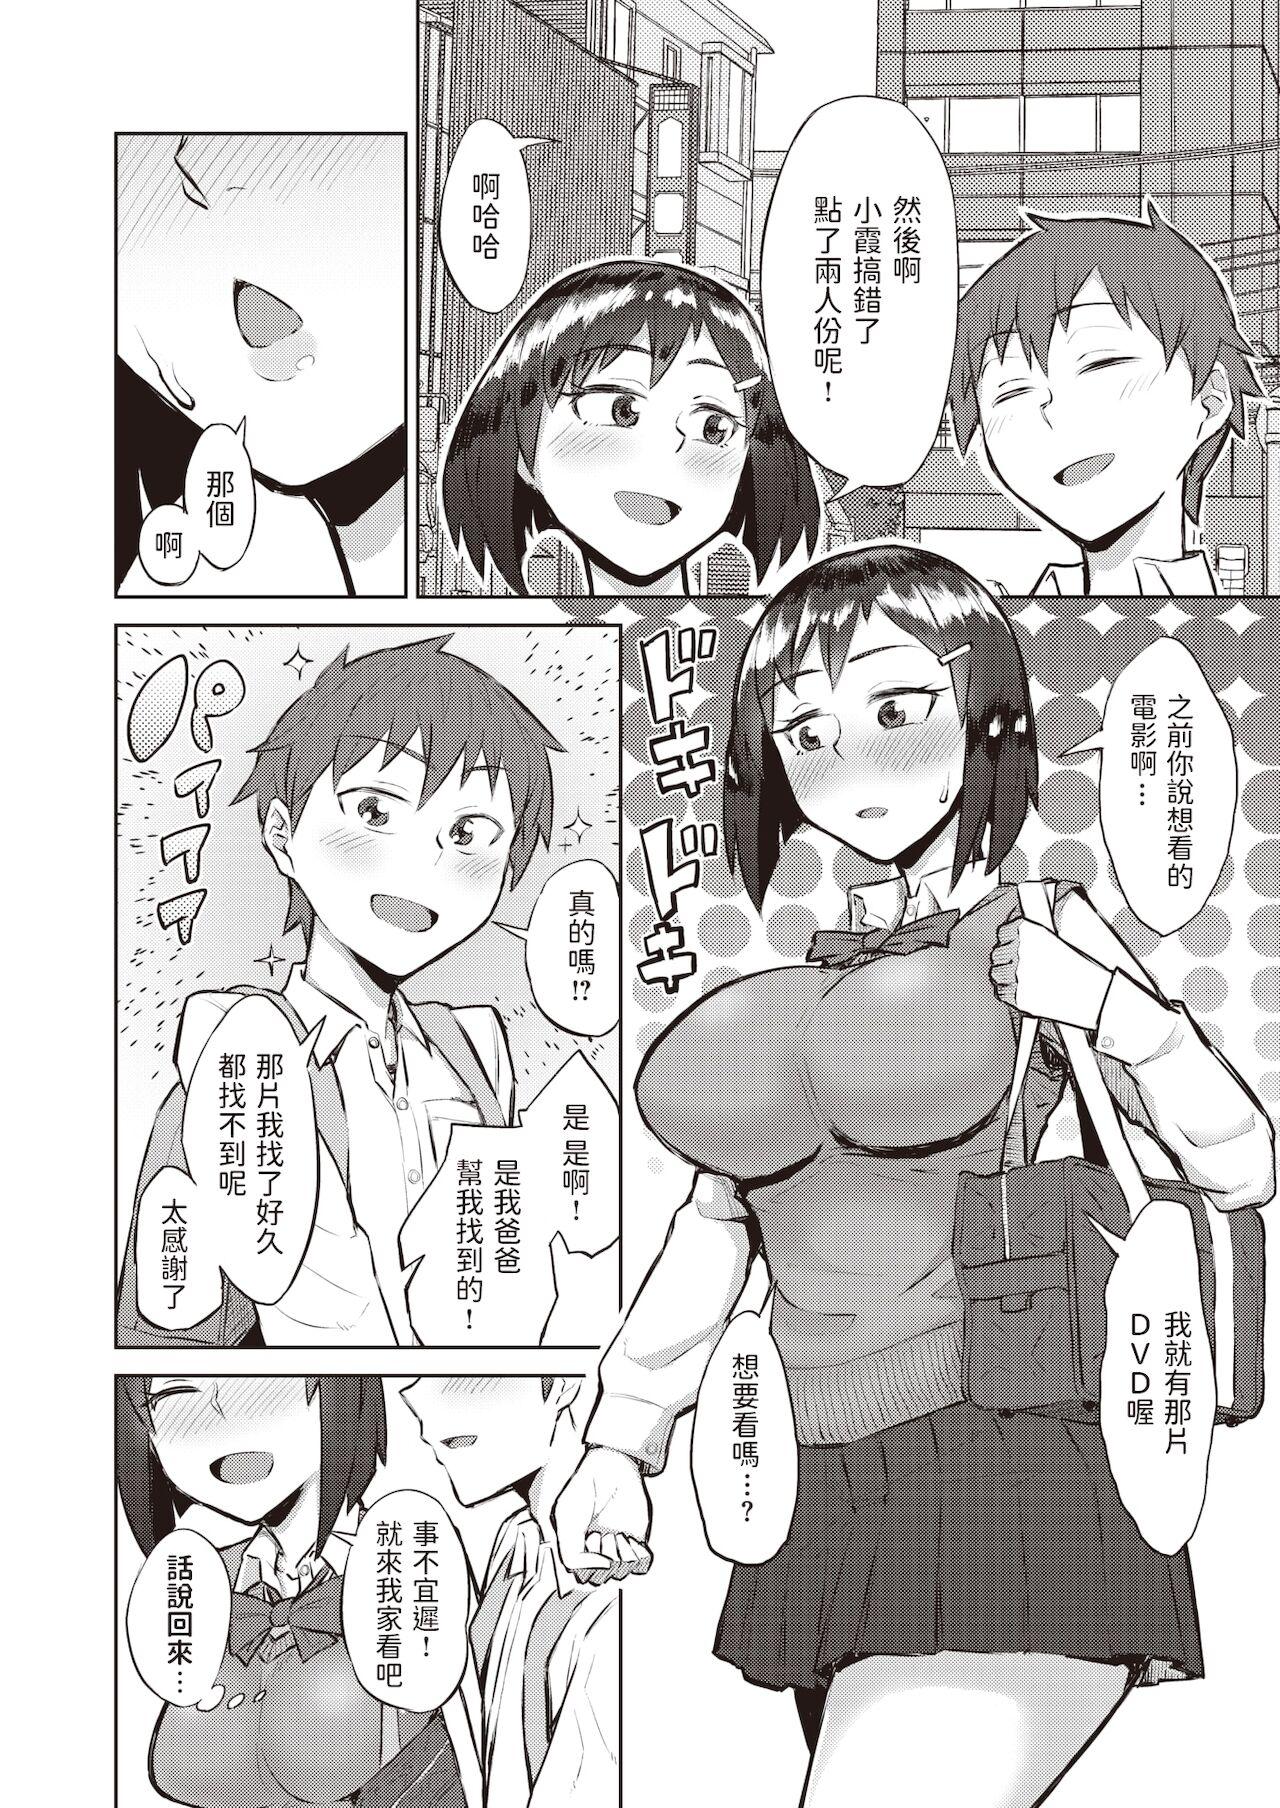 Foreplay [悪天候] るっくあっとみー (COMIC 失楽天 2019年12月号) 中文翻譯 Twink - Page 2